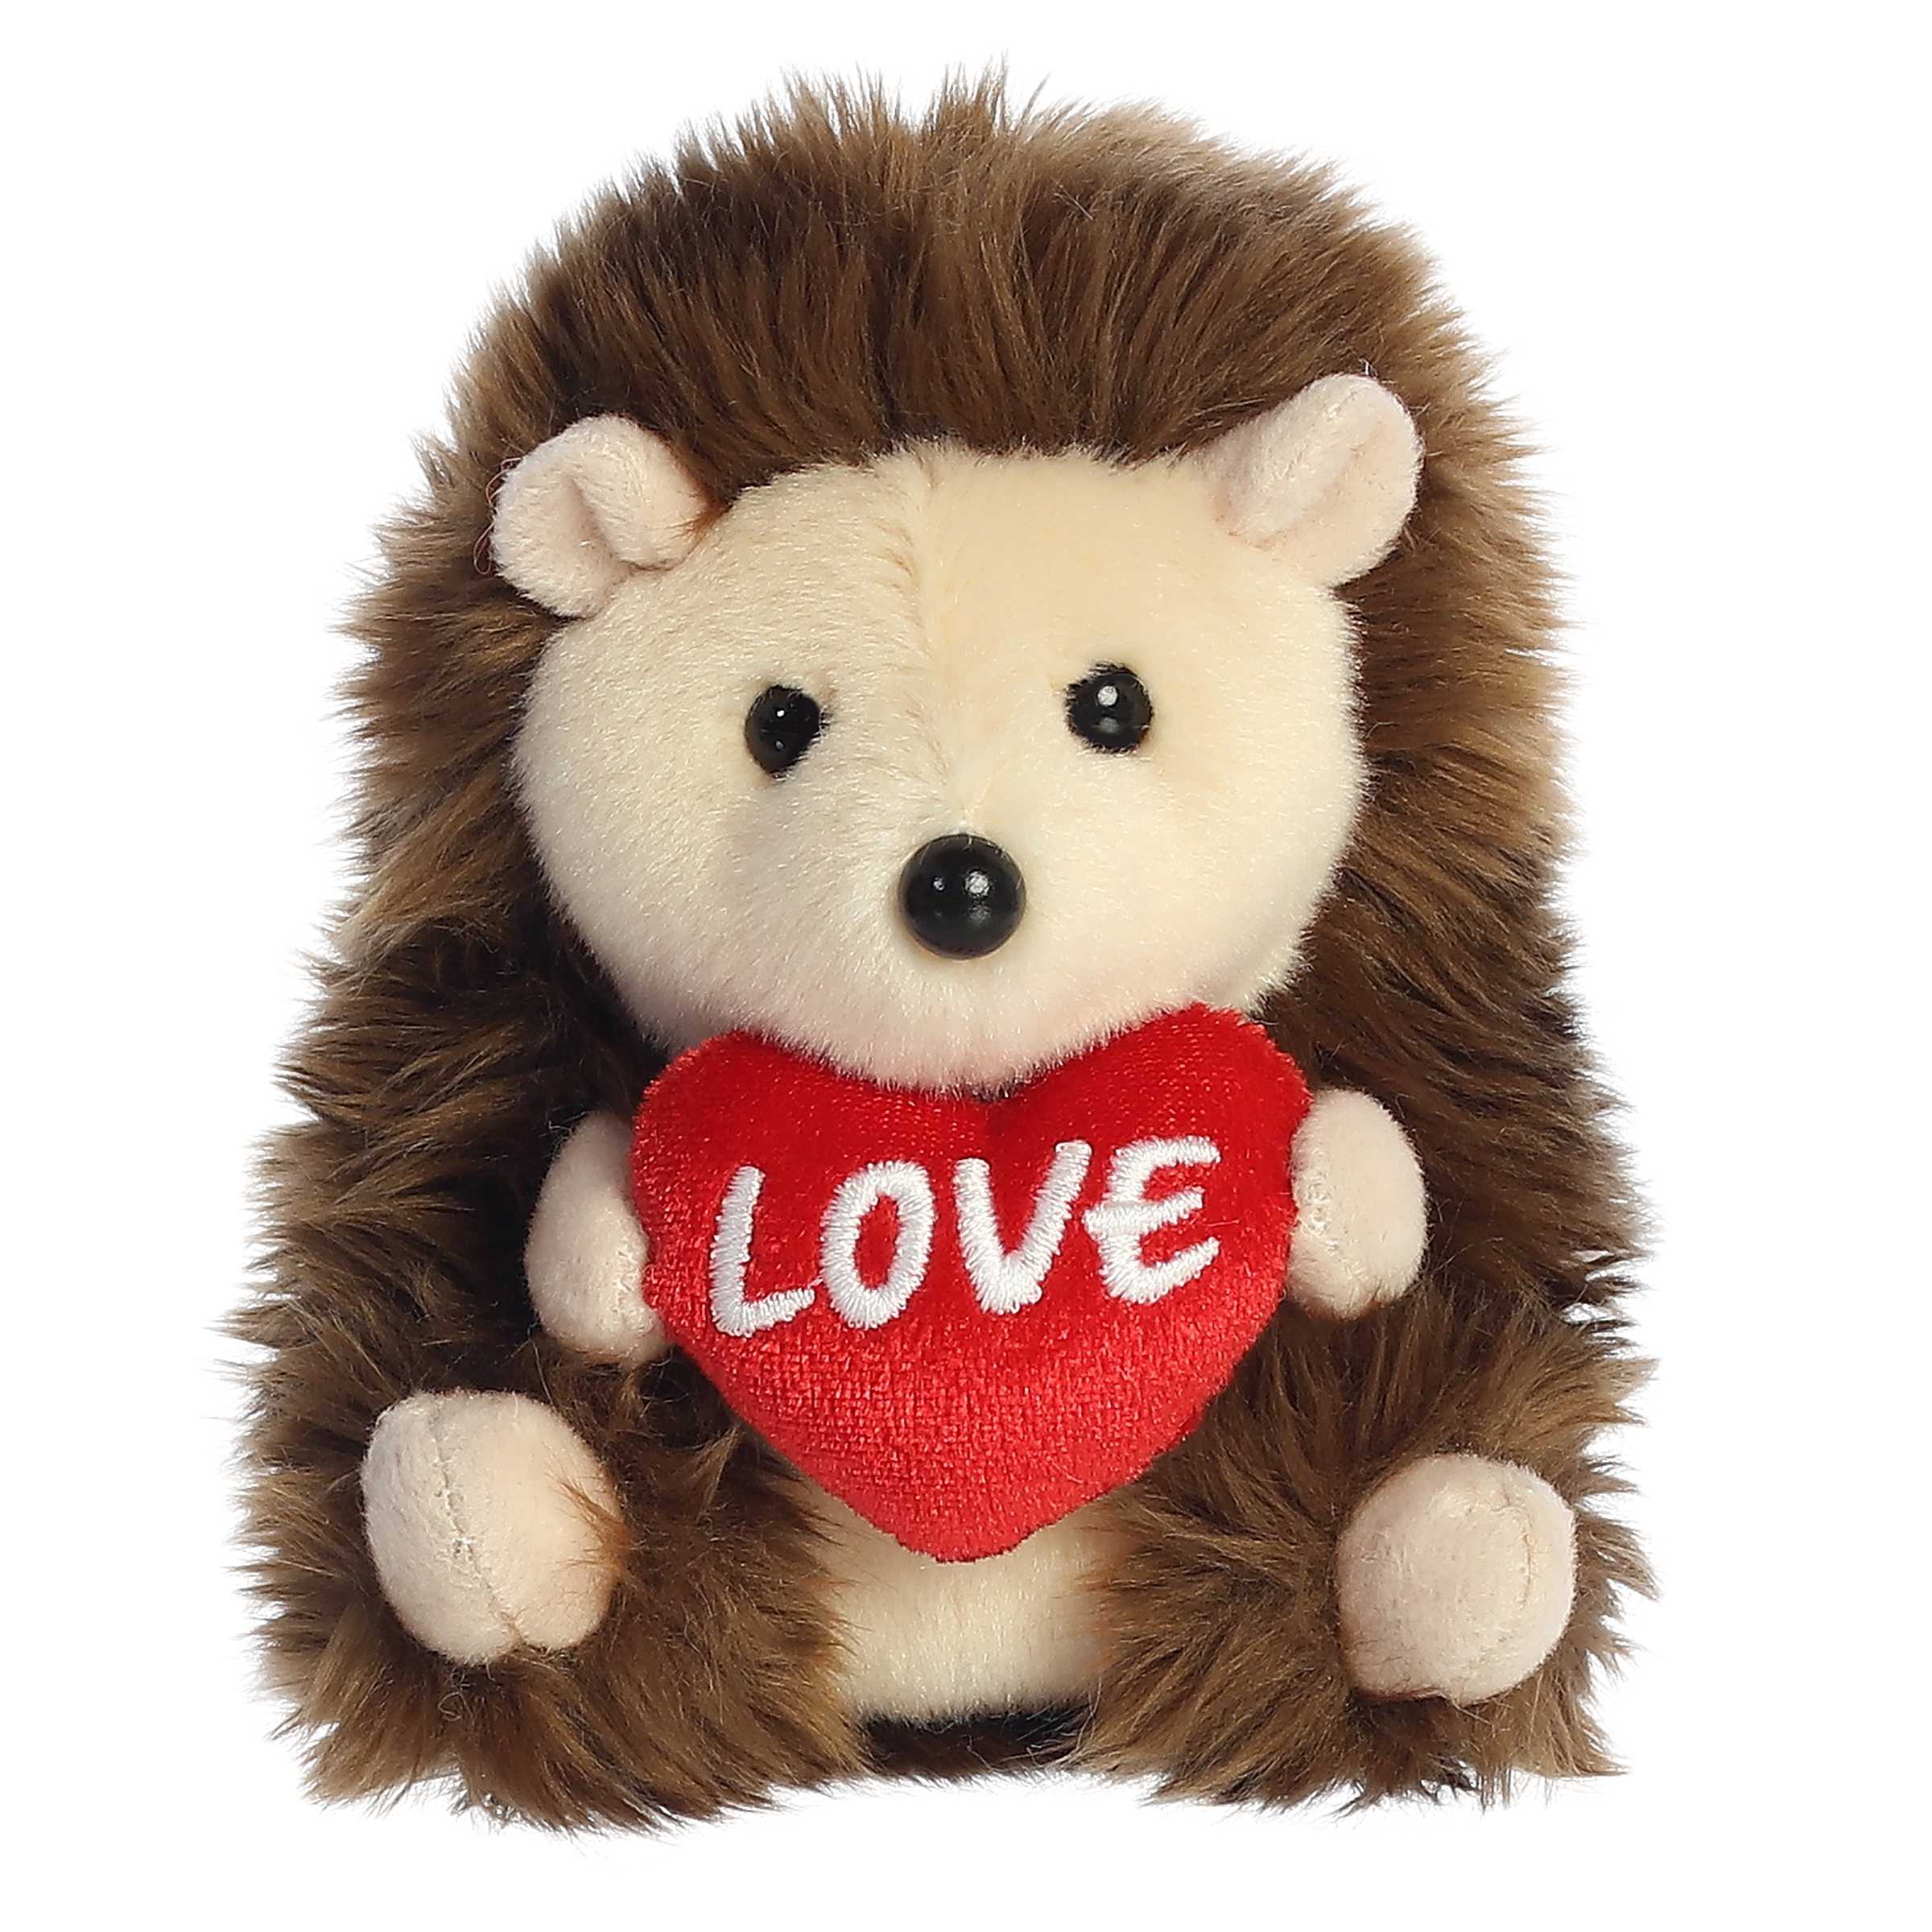 Earthy brown Hedgehog plush from Rolly Pets, holding a 'Love' heart, in its iconic, balanced pose, perfect for Valentine's!